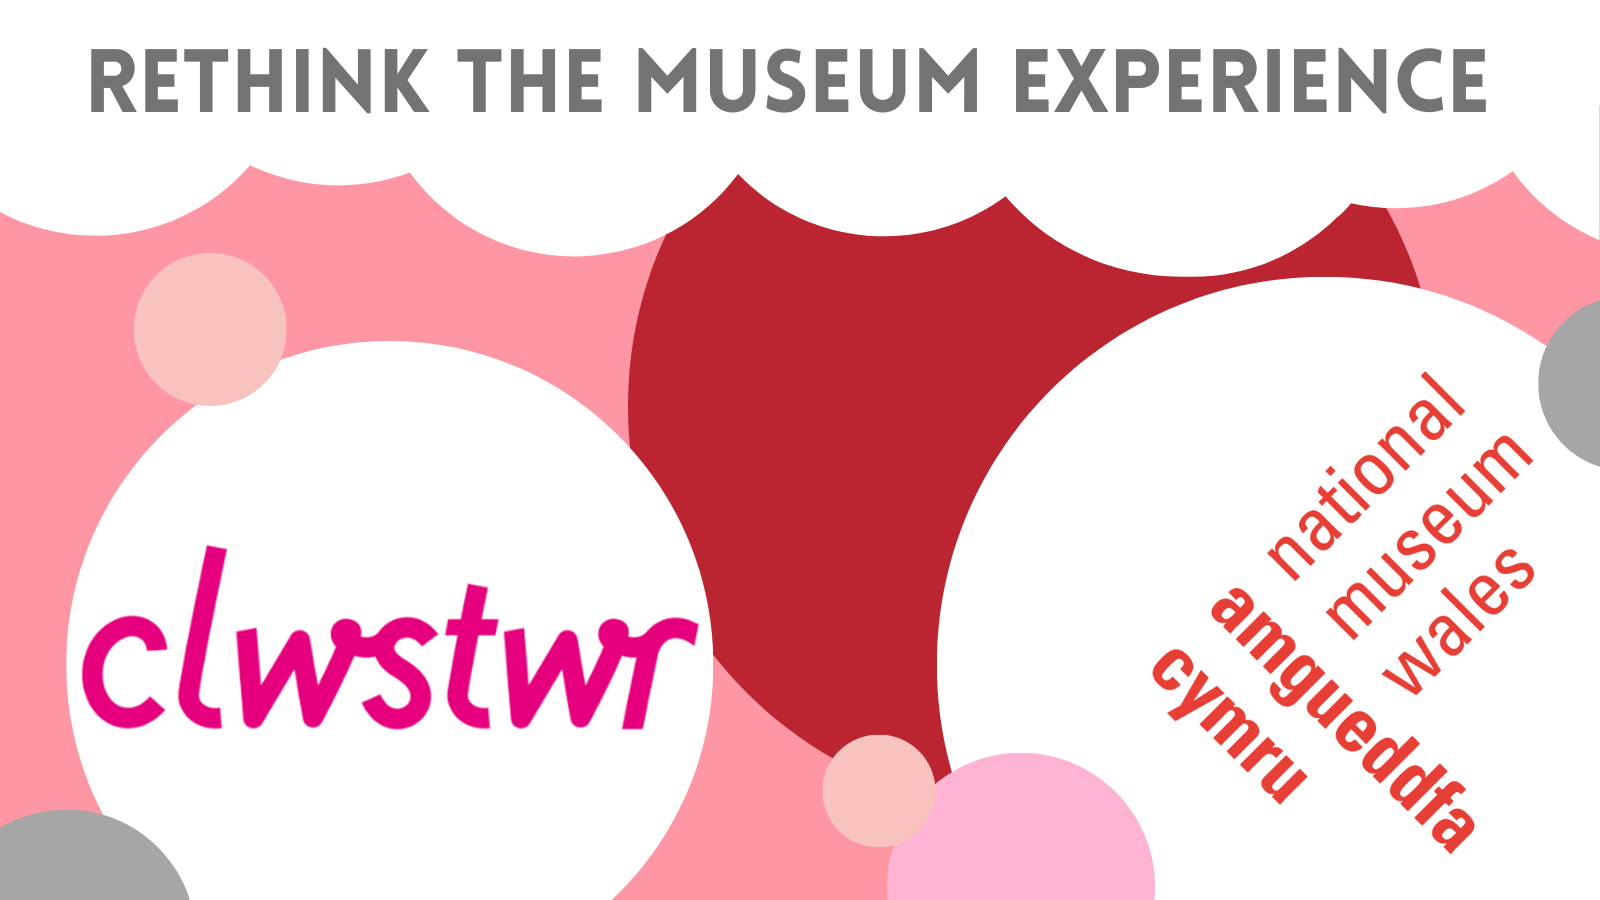 Clwstwr and Amgueddfa Cymru logos on pink background. Image reads: rethink the museum experience